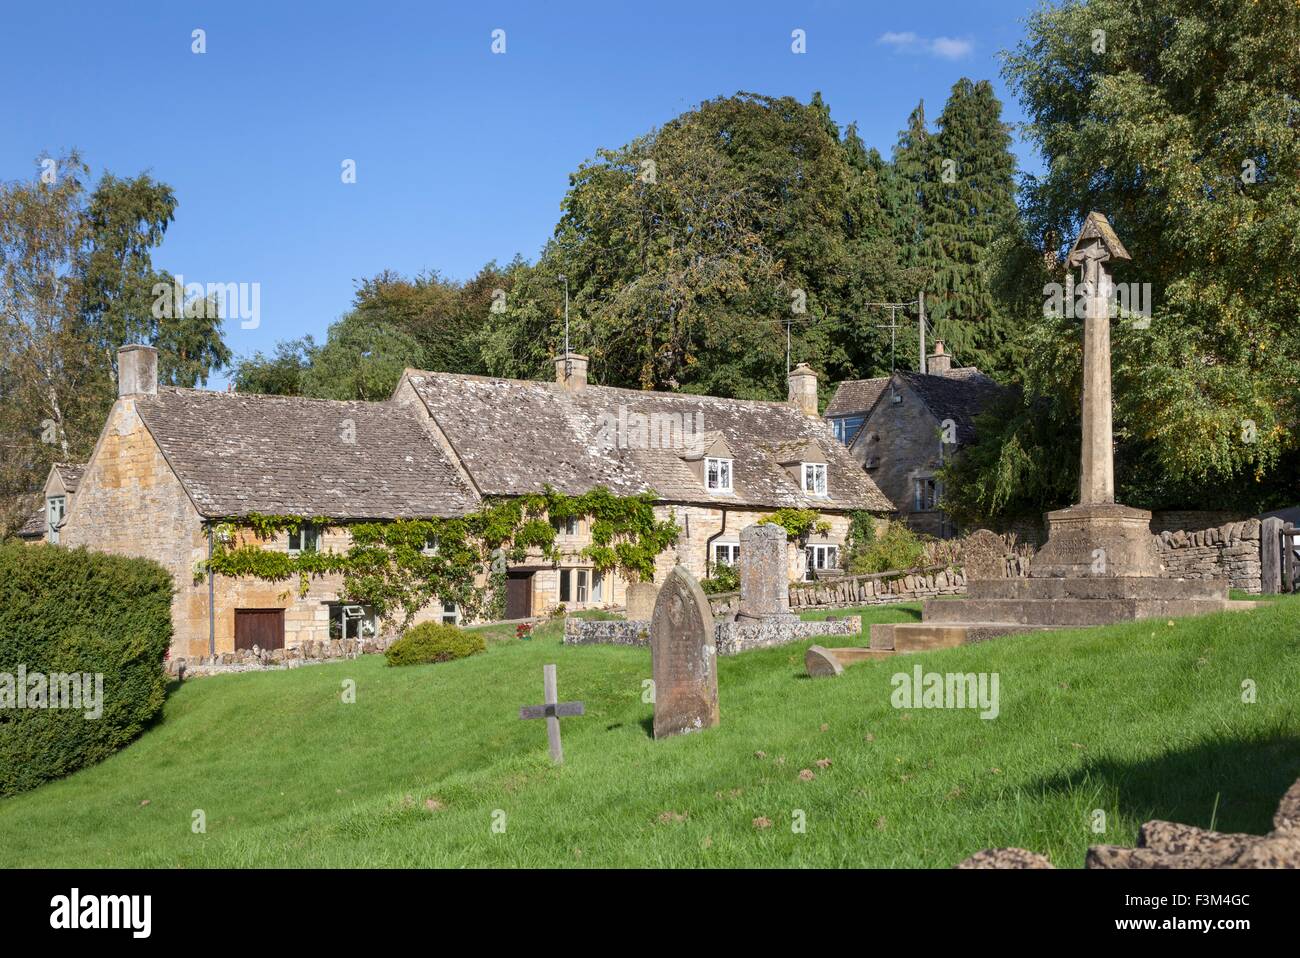 Pretty Cotswold cottages at Snowshill, Worcestershire, England. Stock Photo